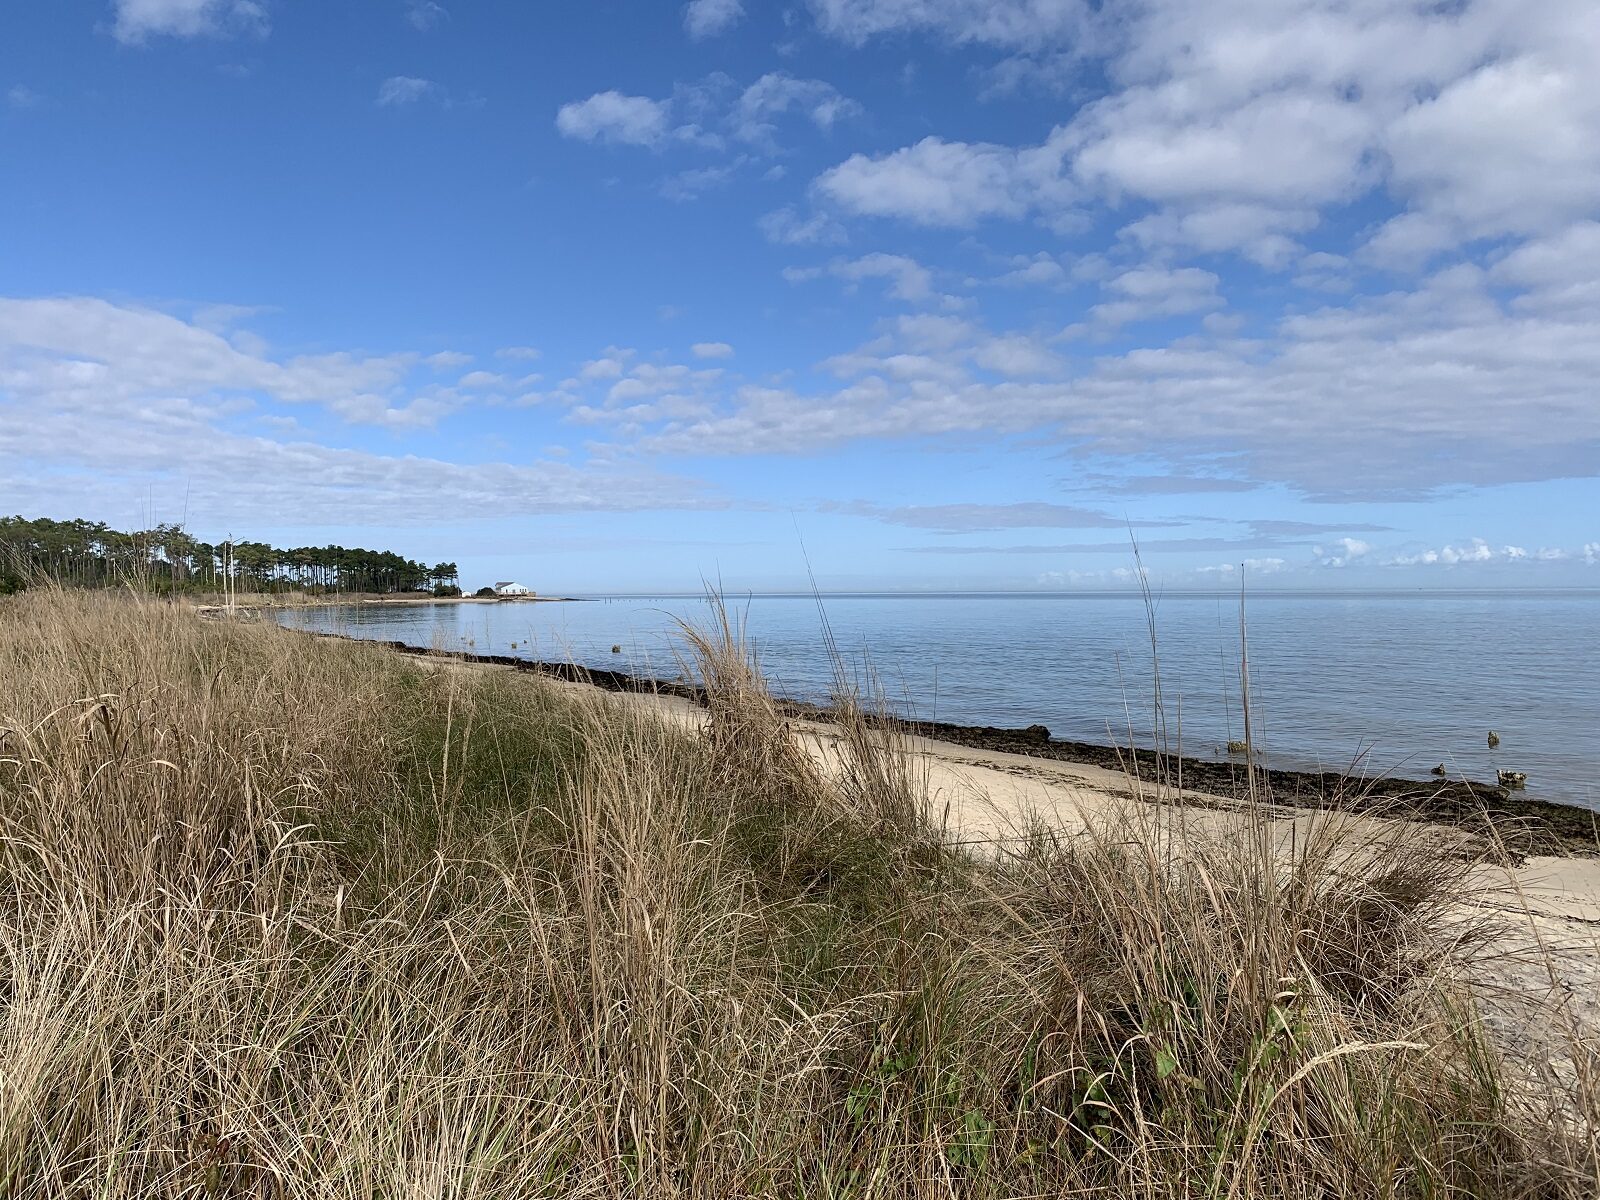 The foreground is beachgrass and in the background a sandy beach is visible on the far right a smattering of pine trees can be seen; this is Bethel Beach Natural Area Preserve